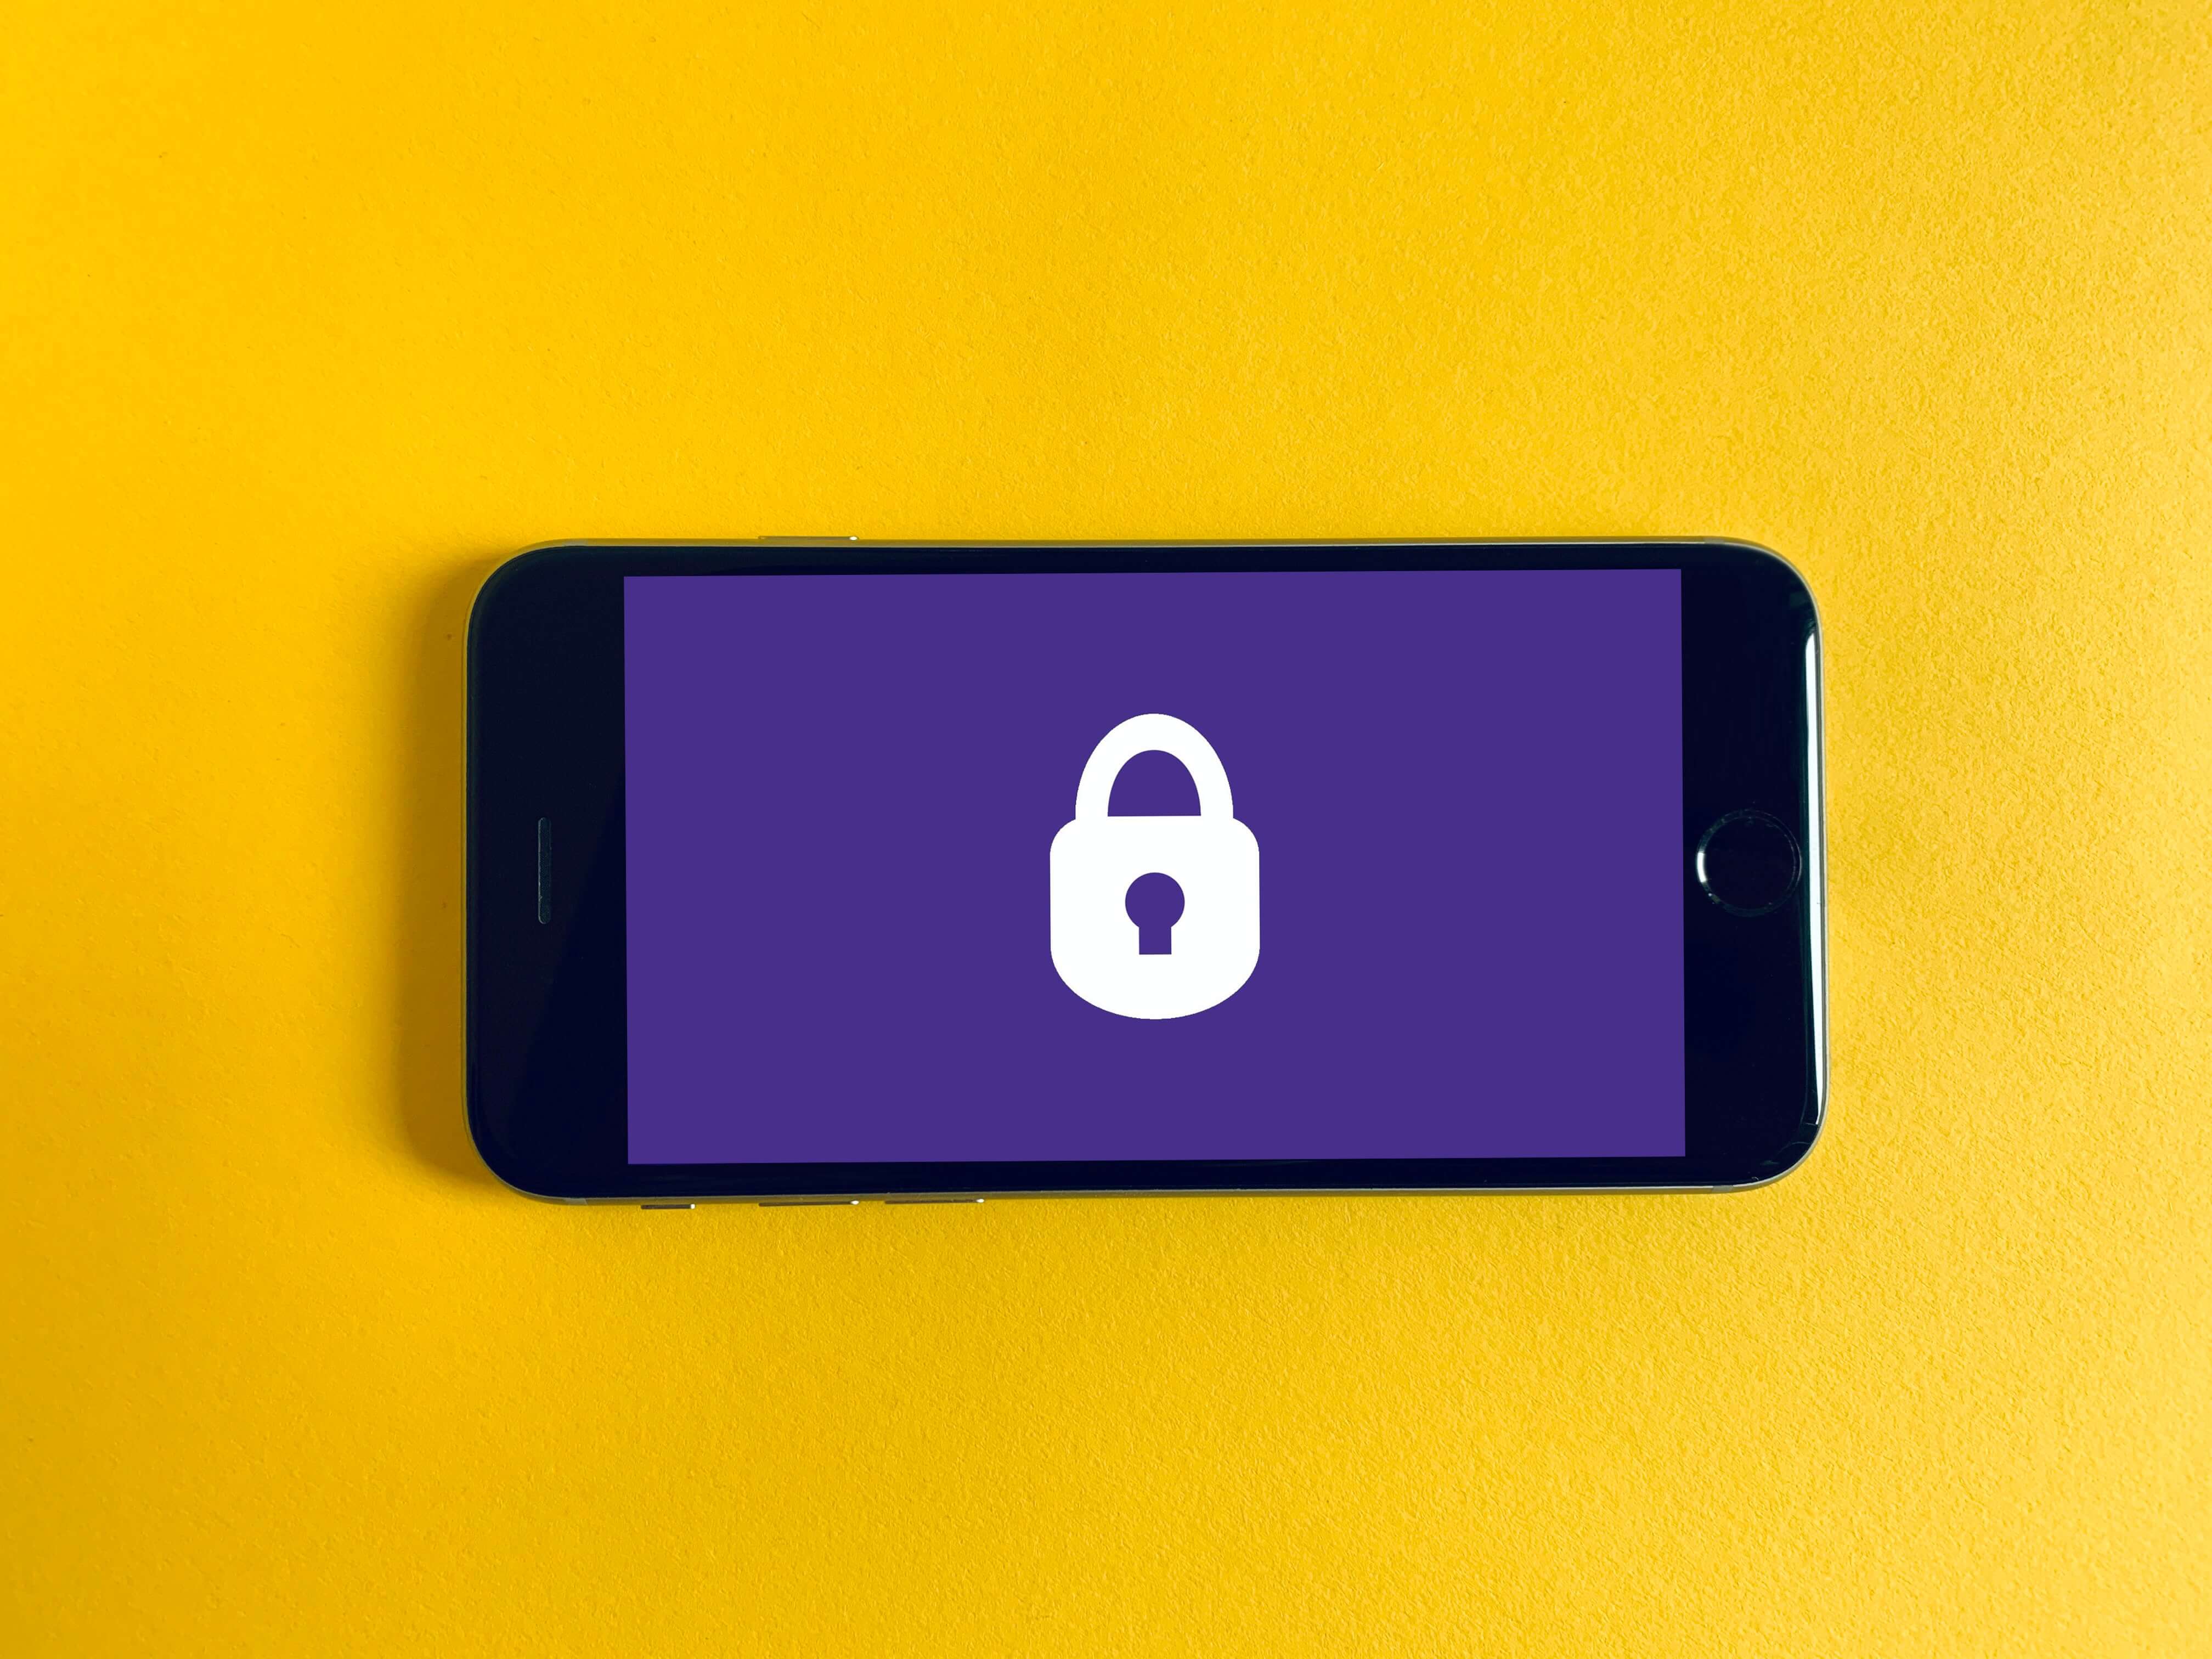 A smartphone displaying a white padlock icon against a purple background